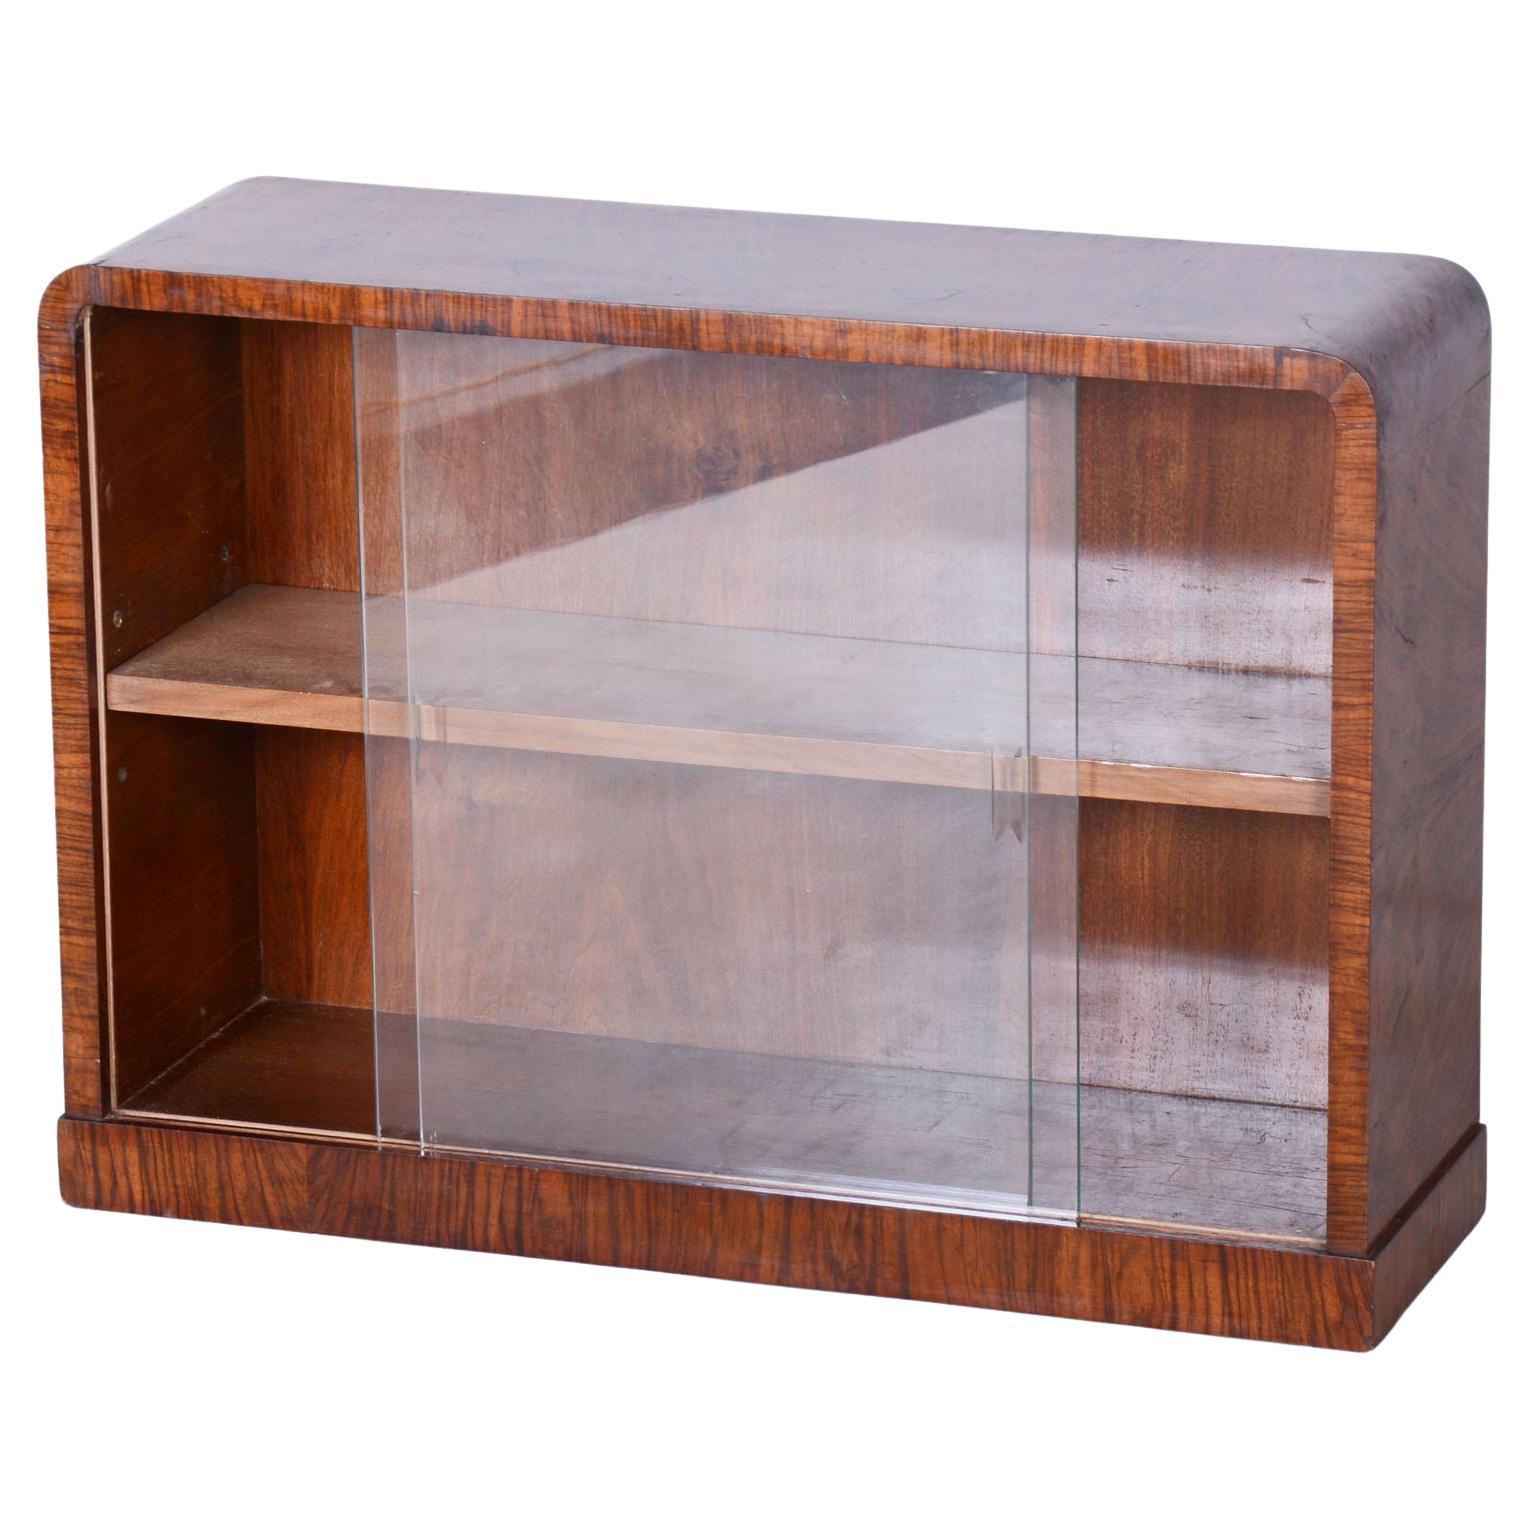 Small Restored Art Deco Display Bookcase, Walnut and Glass, Czech, 1930s For Sale